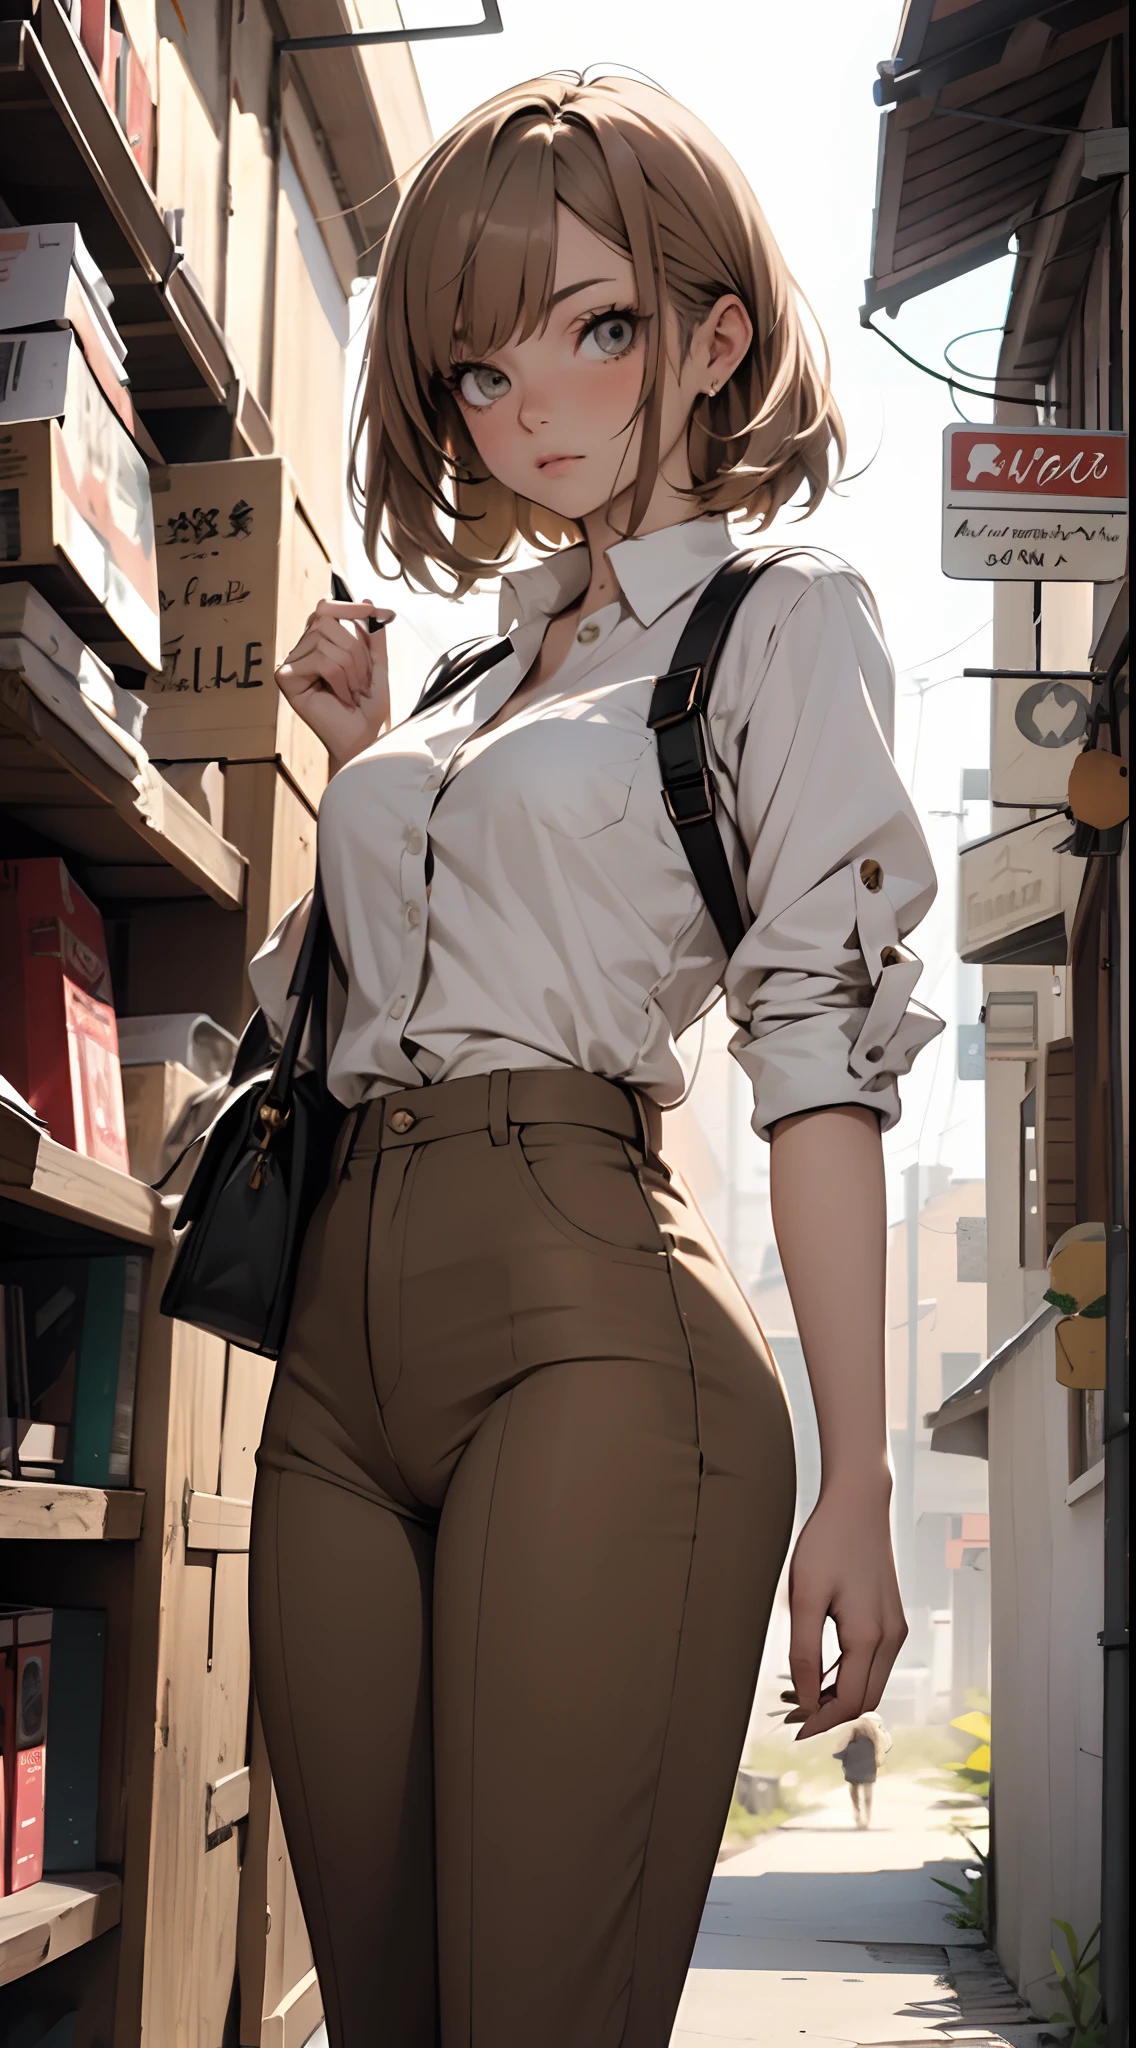 Light brown haired girl, with pants with drawings of eyes, masterpiece, very detailed